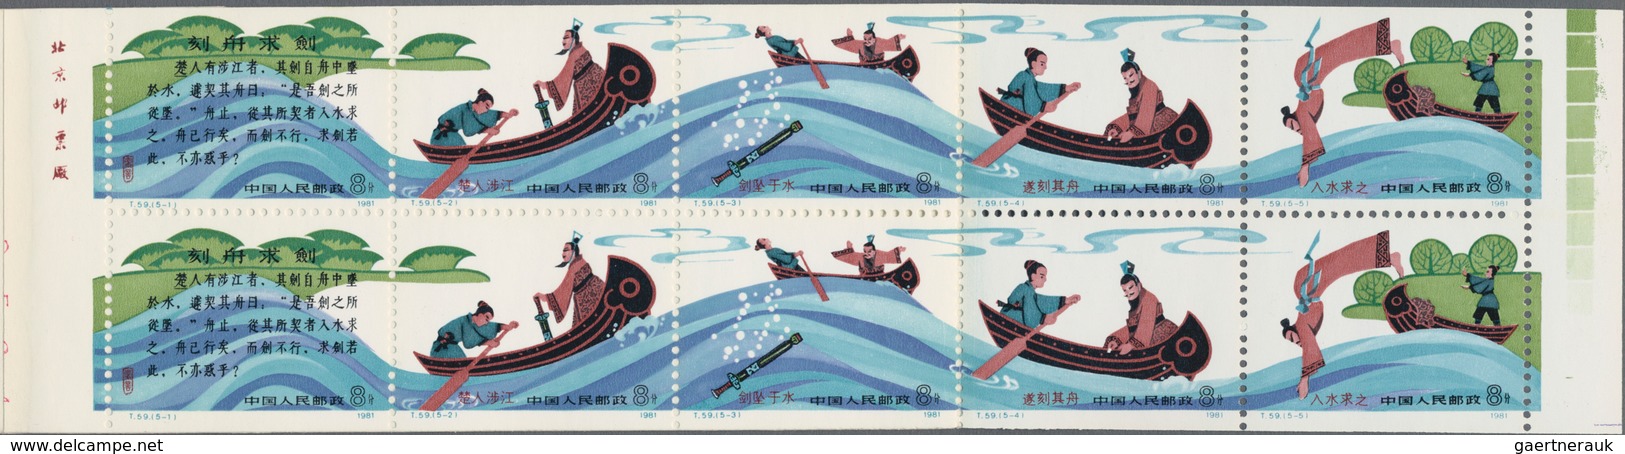 China - Volksrepublik: 1980/81, 3 booklet panes, including the SB2 Chinese River Dolphin, SB3 Year o